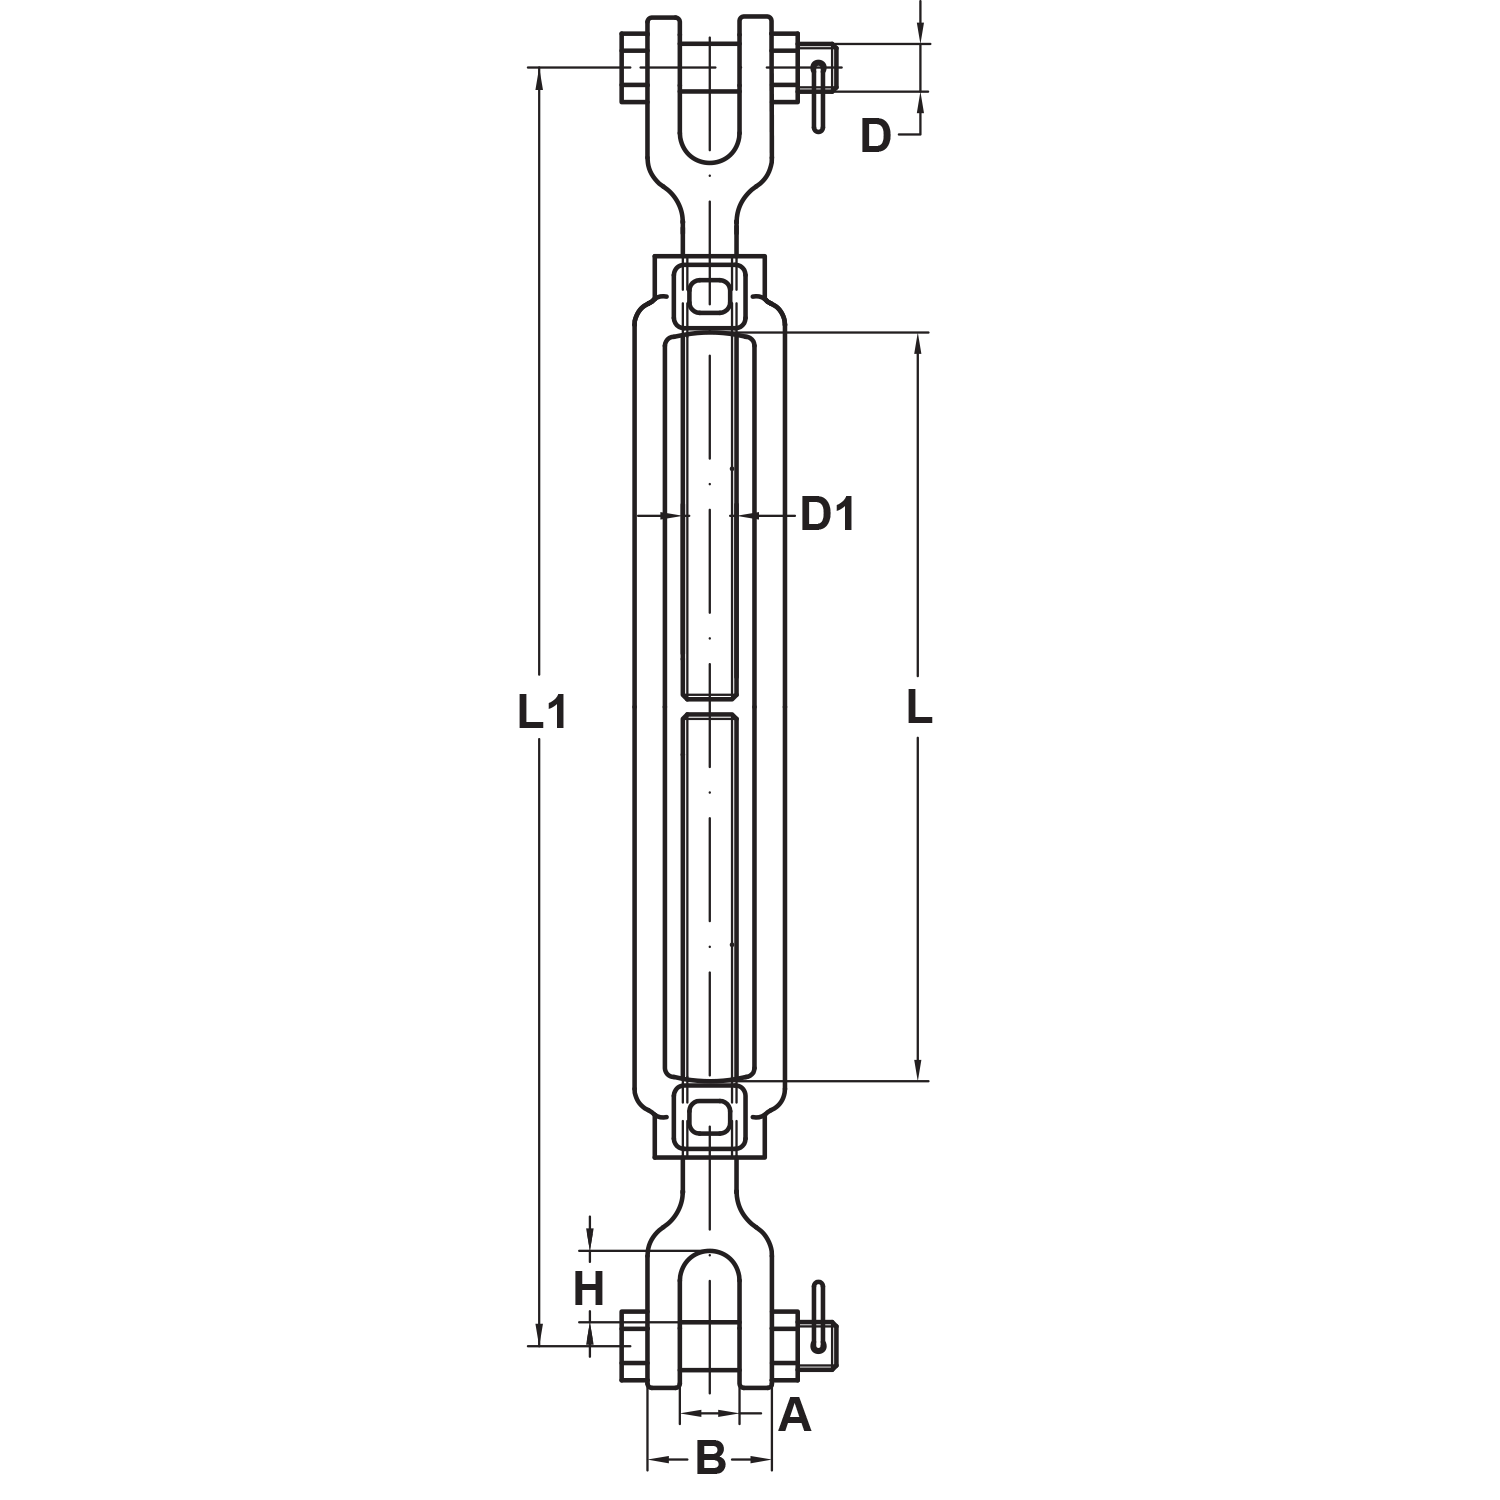 1-4-x-4-stainless-steel-jaw-jaw-turnbuckle-us-type-diagram